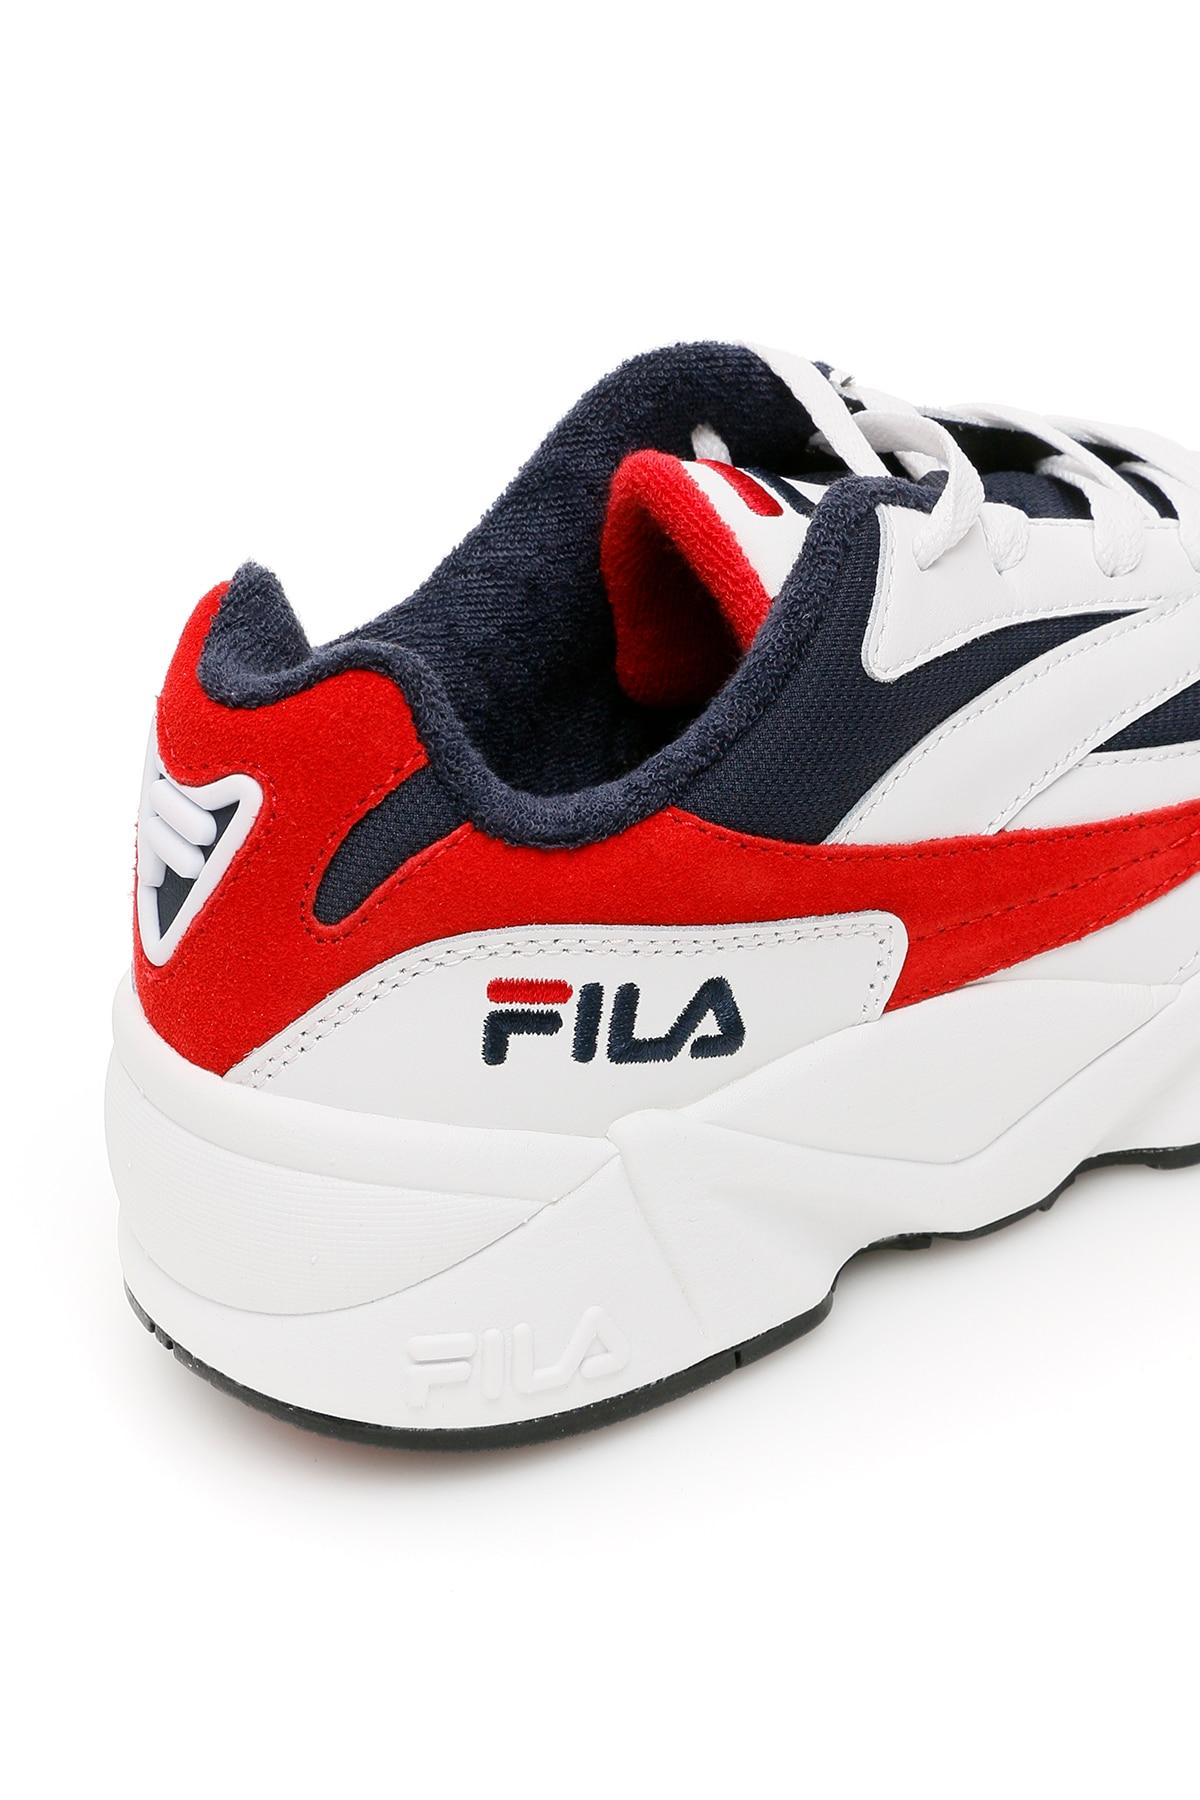 Fila Leather Venom 94 Sneakers in White,Blue,Red (Red) Men - Lyst